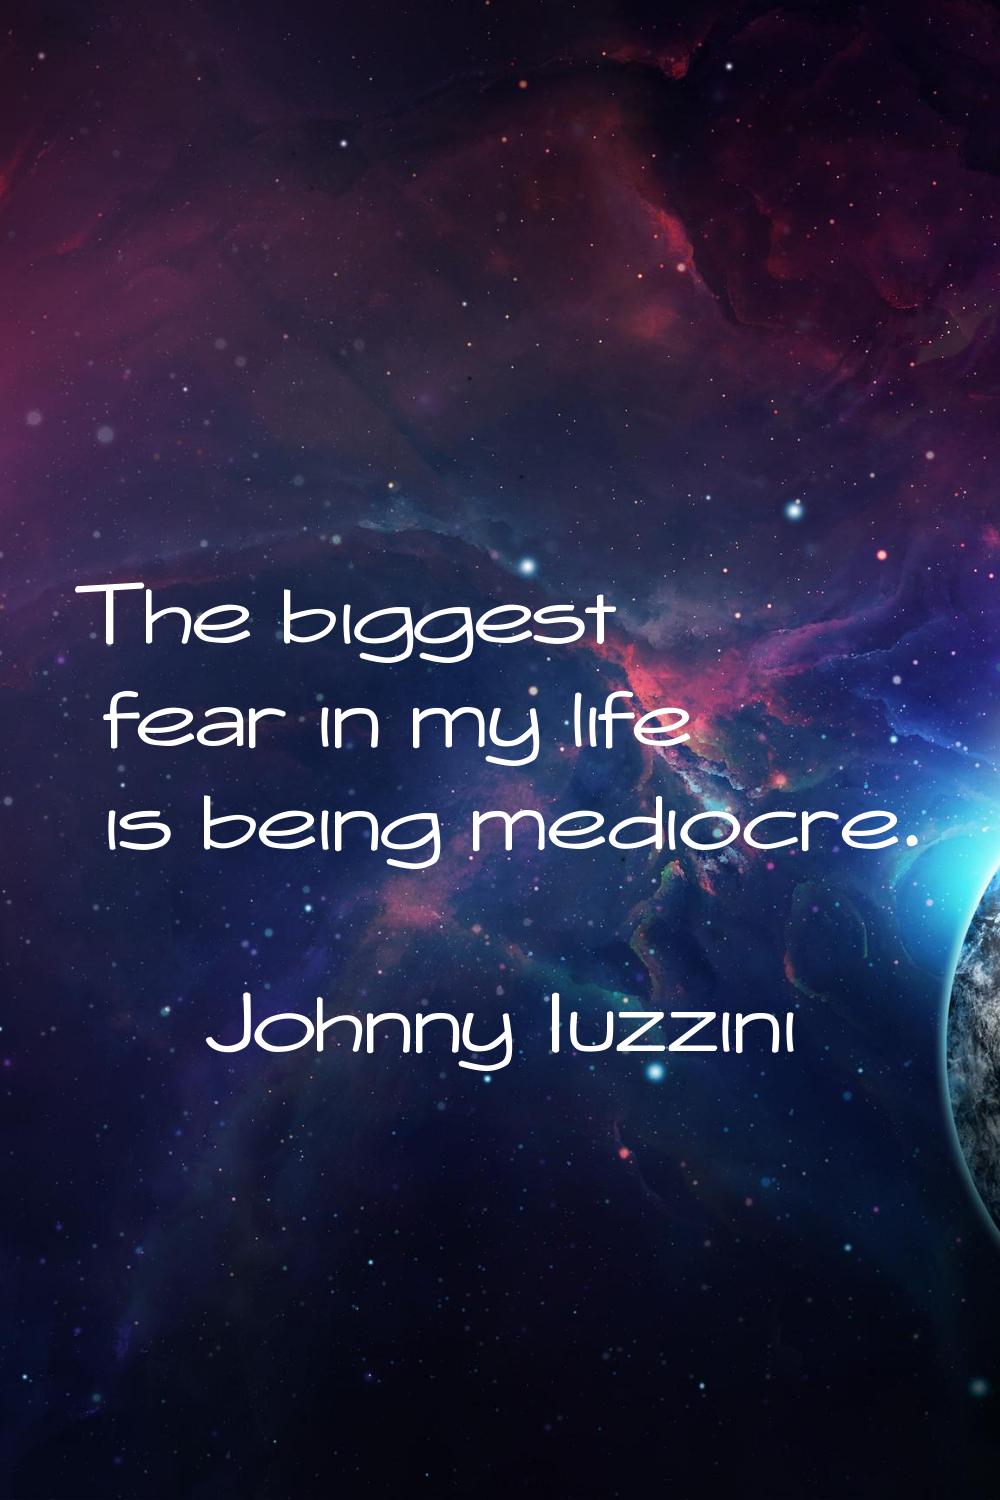 The biggest fear in my life is being mediocre.